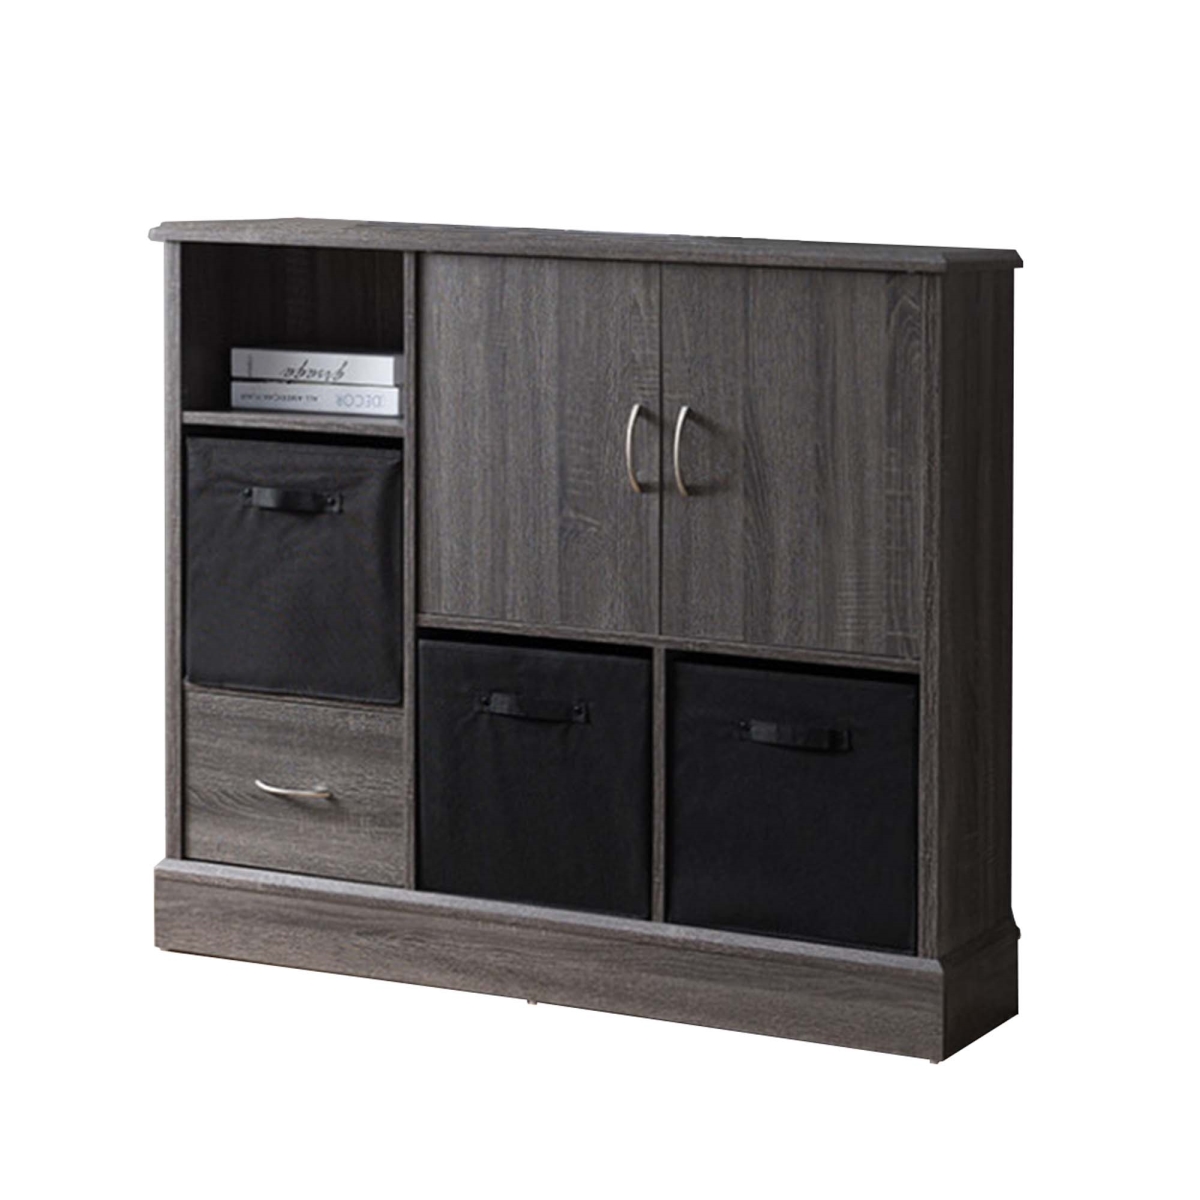 352142 Wooden Storage Cabinet With One Drawer & Open Shelf, Gray & Black